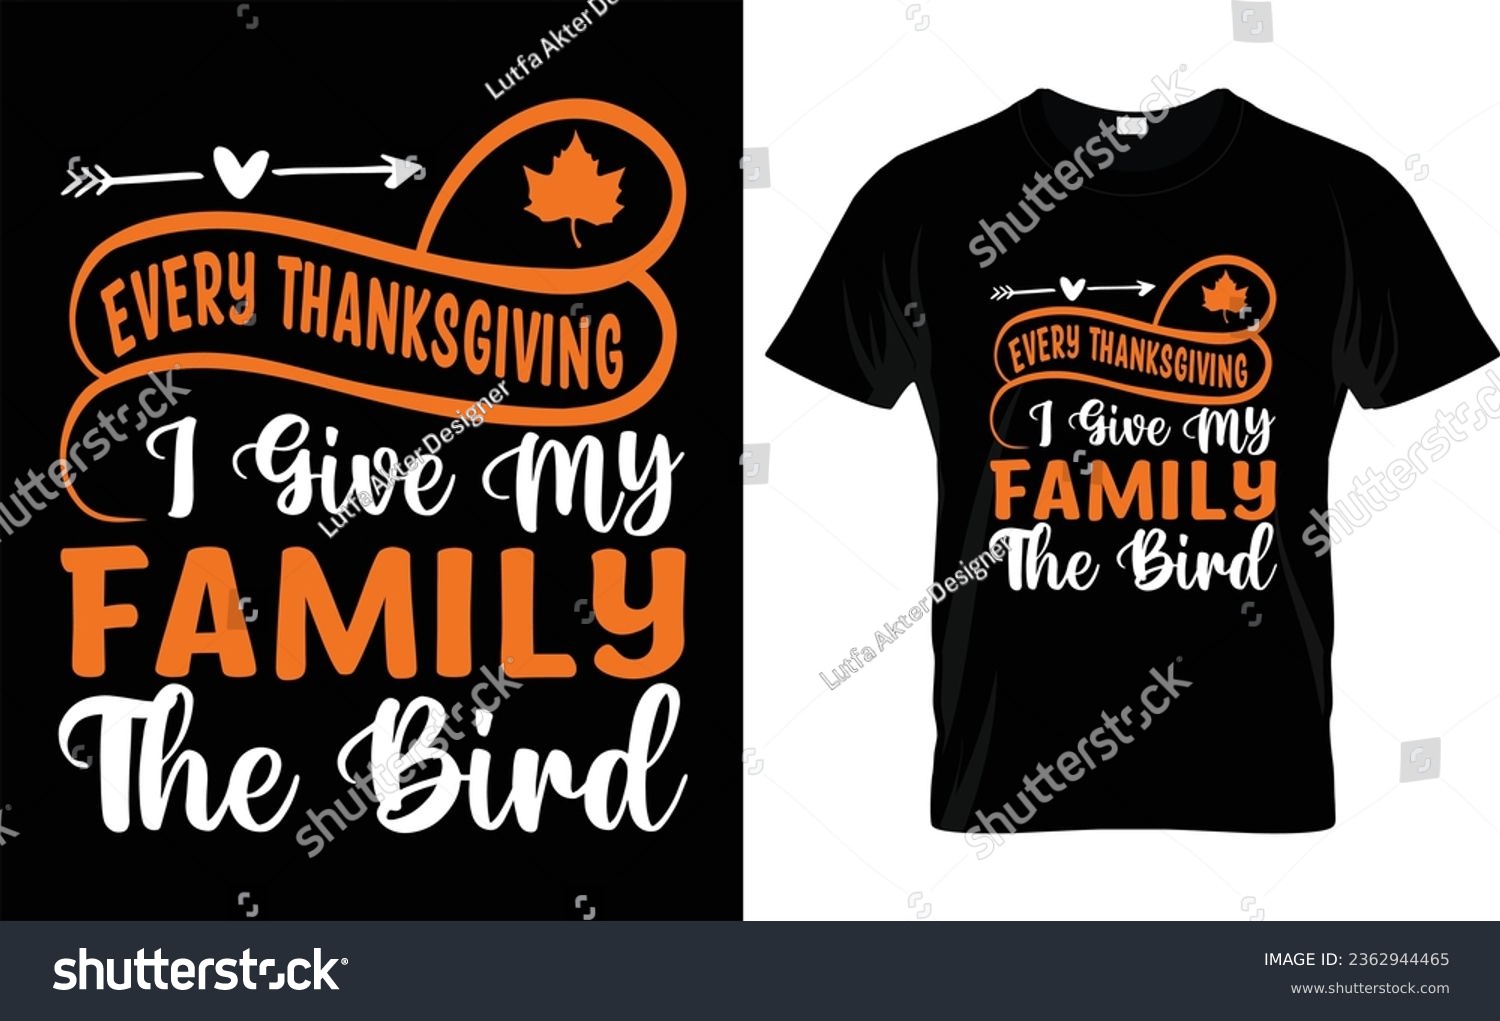 SVG of EVERY THANKSGIVING I GIVE MY FAMILY THE BIRD svg,vector,typography,Thanksgiving T shirt Design,
 svg